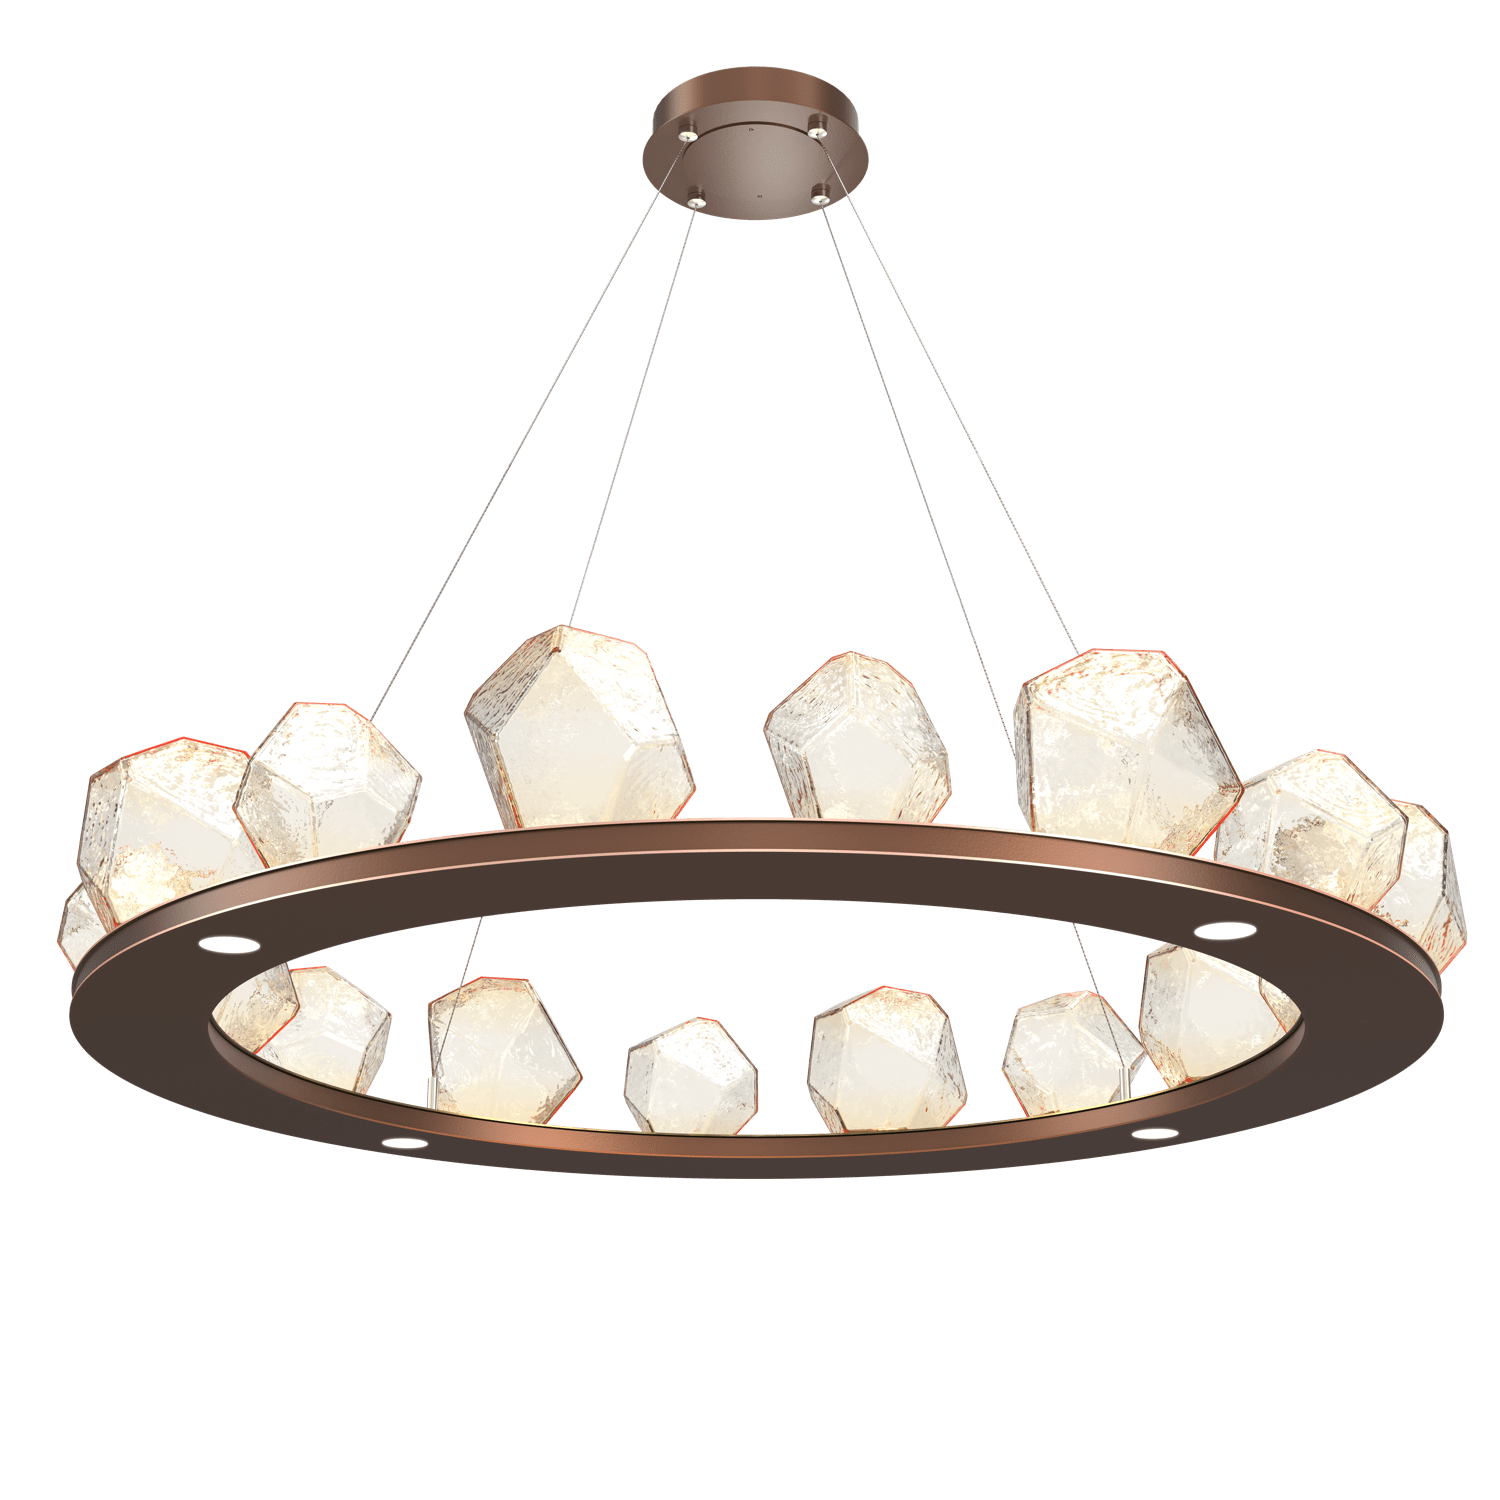 CHB0039-0D-BB-A-Hammerton-Studio-Gem-48-inch-ring-chandelier-with-burnished-bronze-finish-and-amber-blown-glass-shades-and-LED-lamping